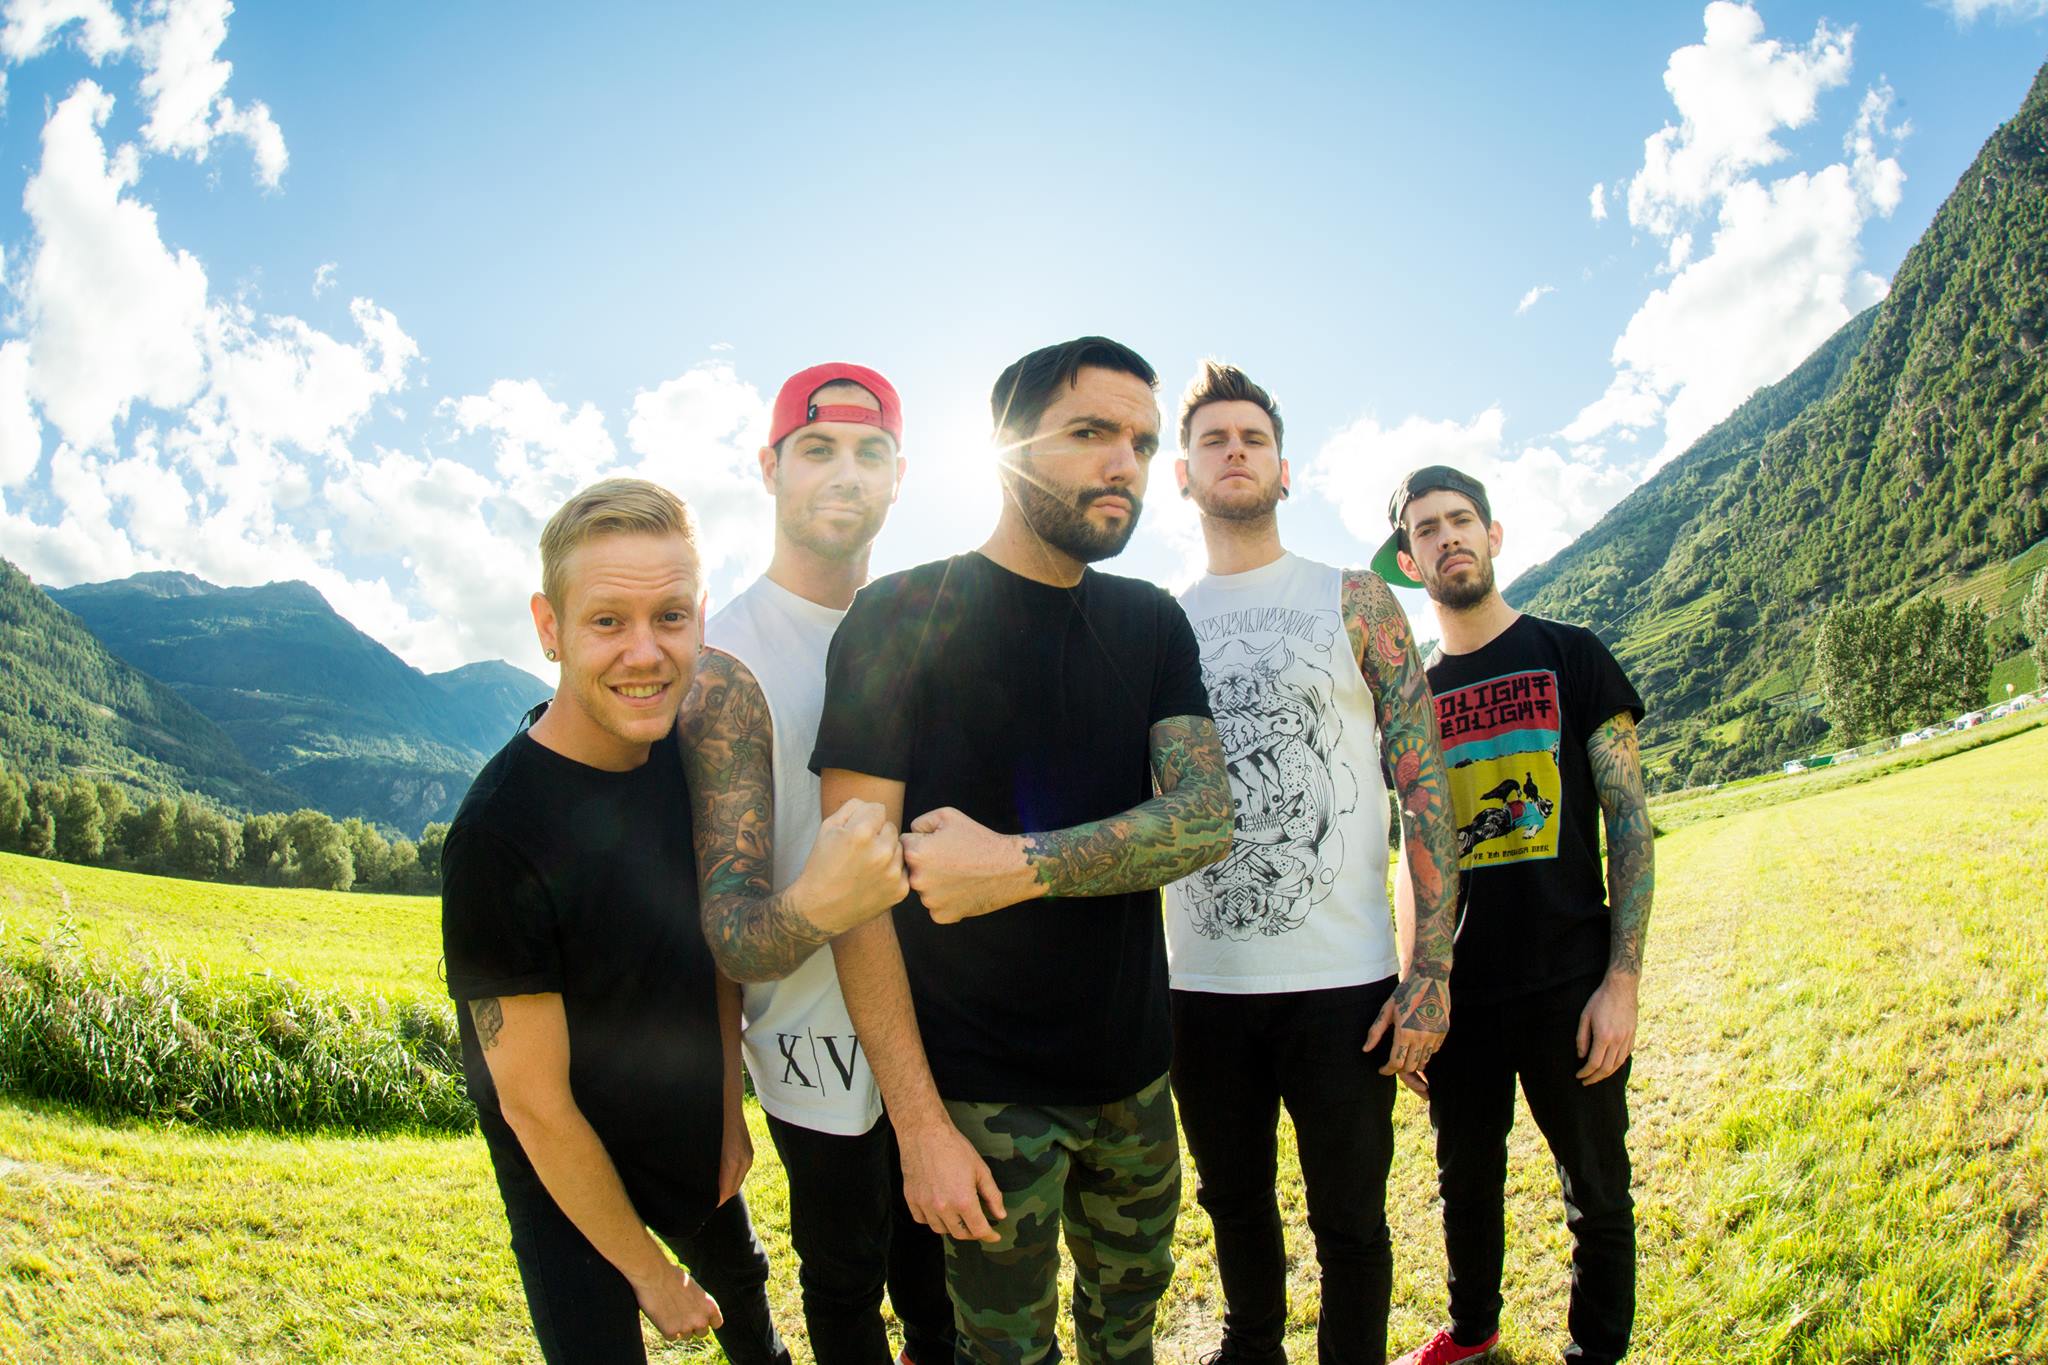 Midweek ARIA Predictions: Nothing but Good Vibrations for A Day To Remember